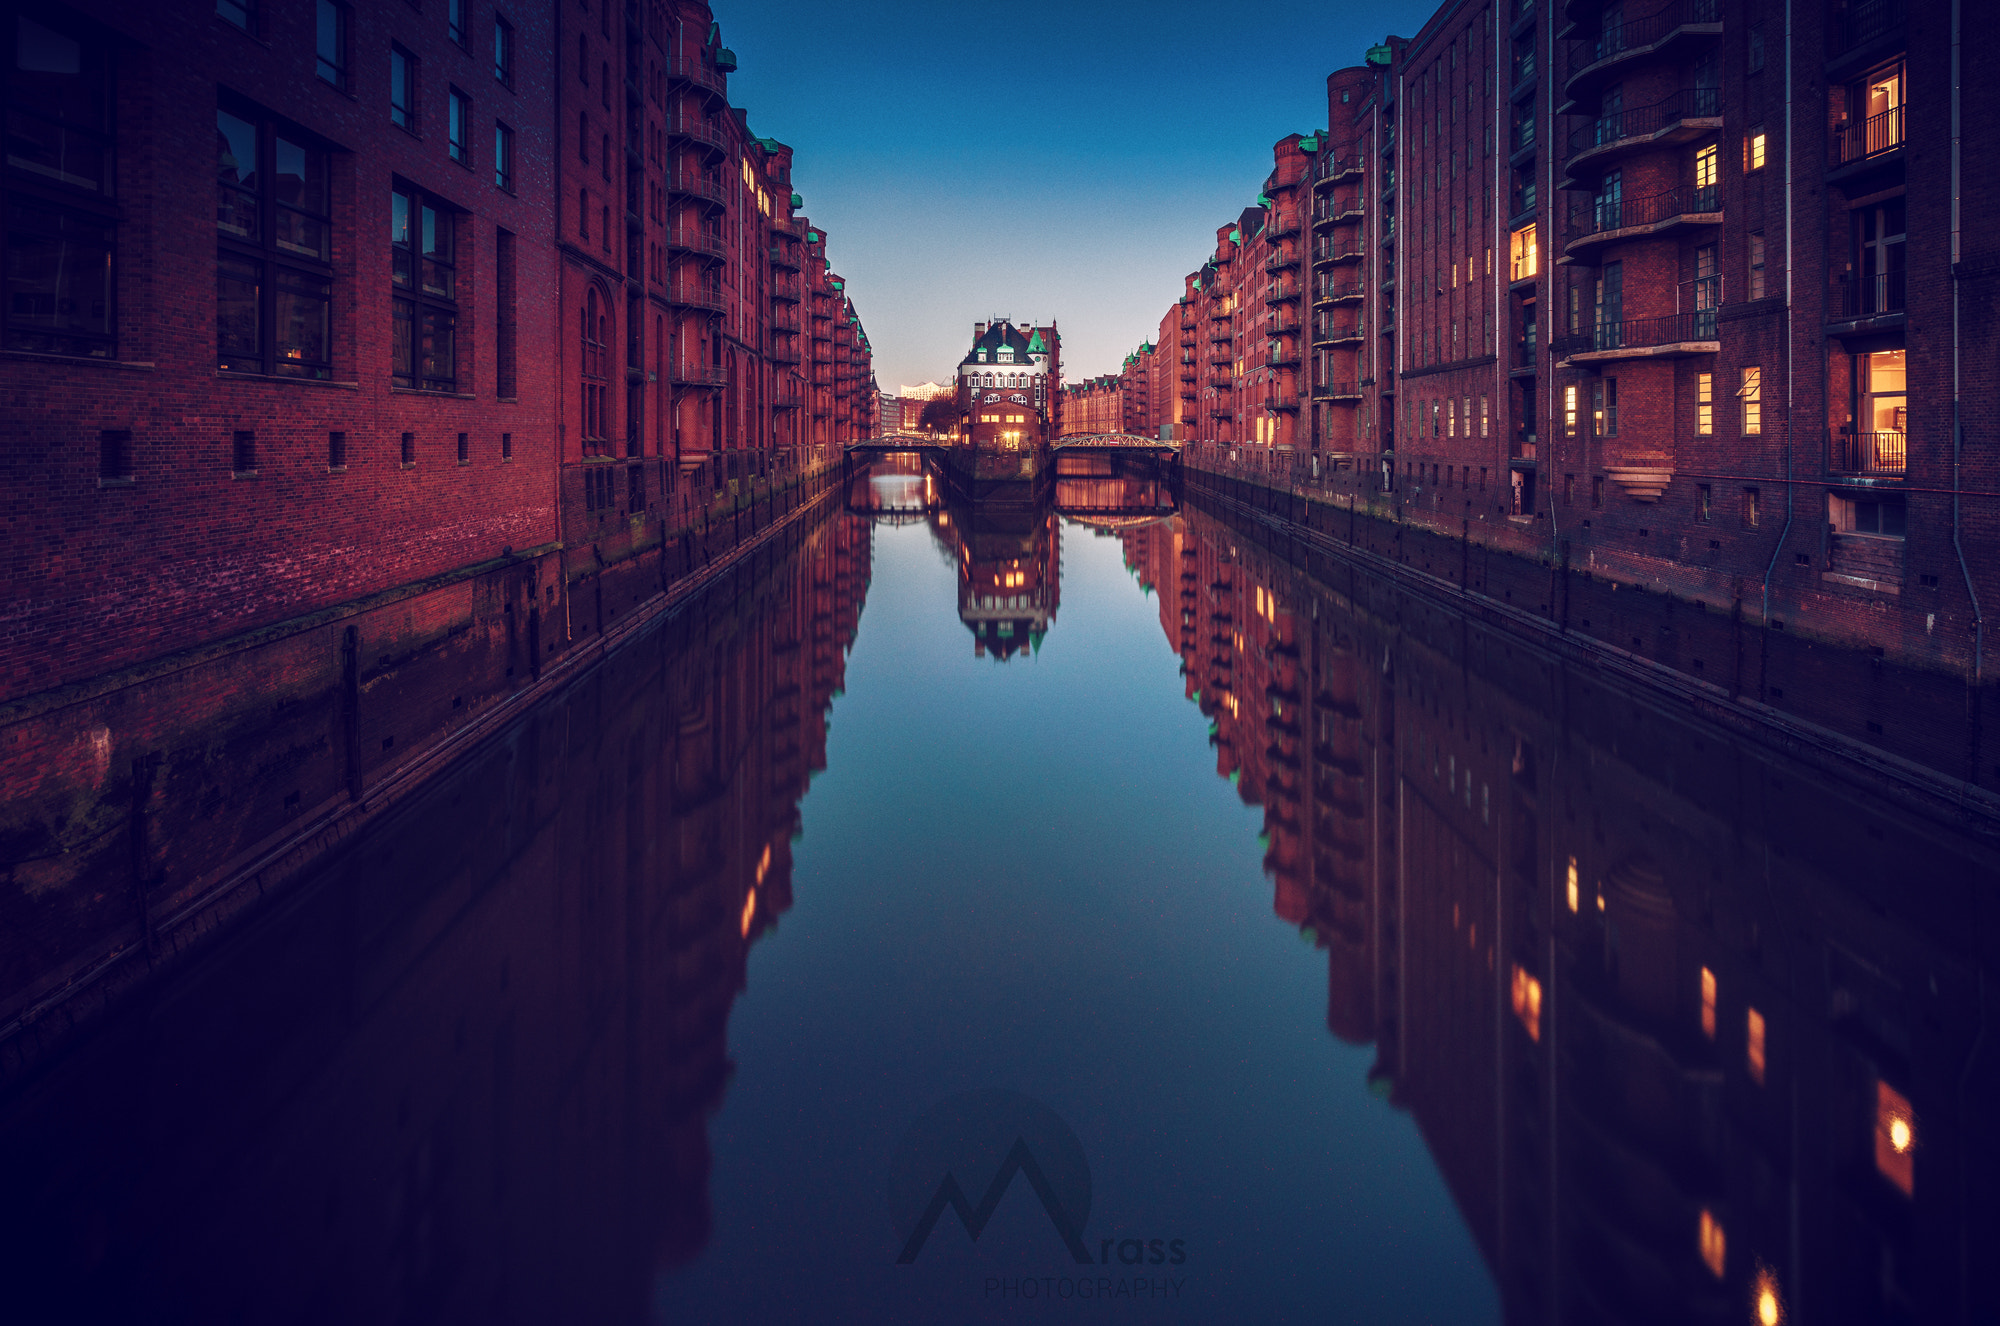 General 2000x1326 canal reflection architecture watermarked Hamburg